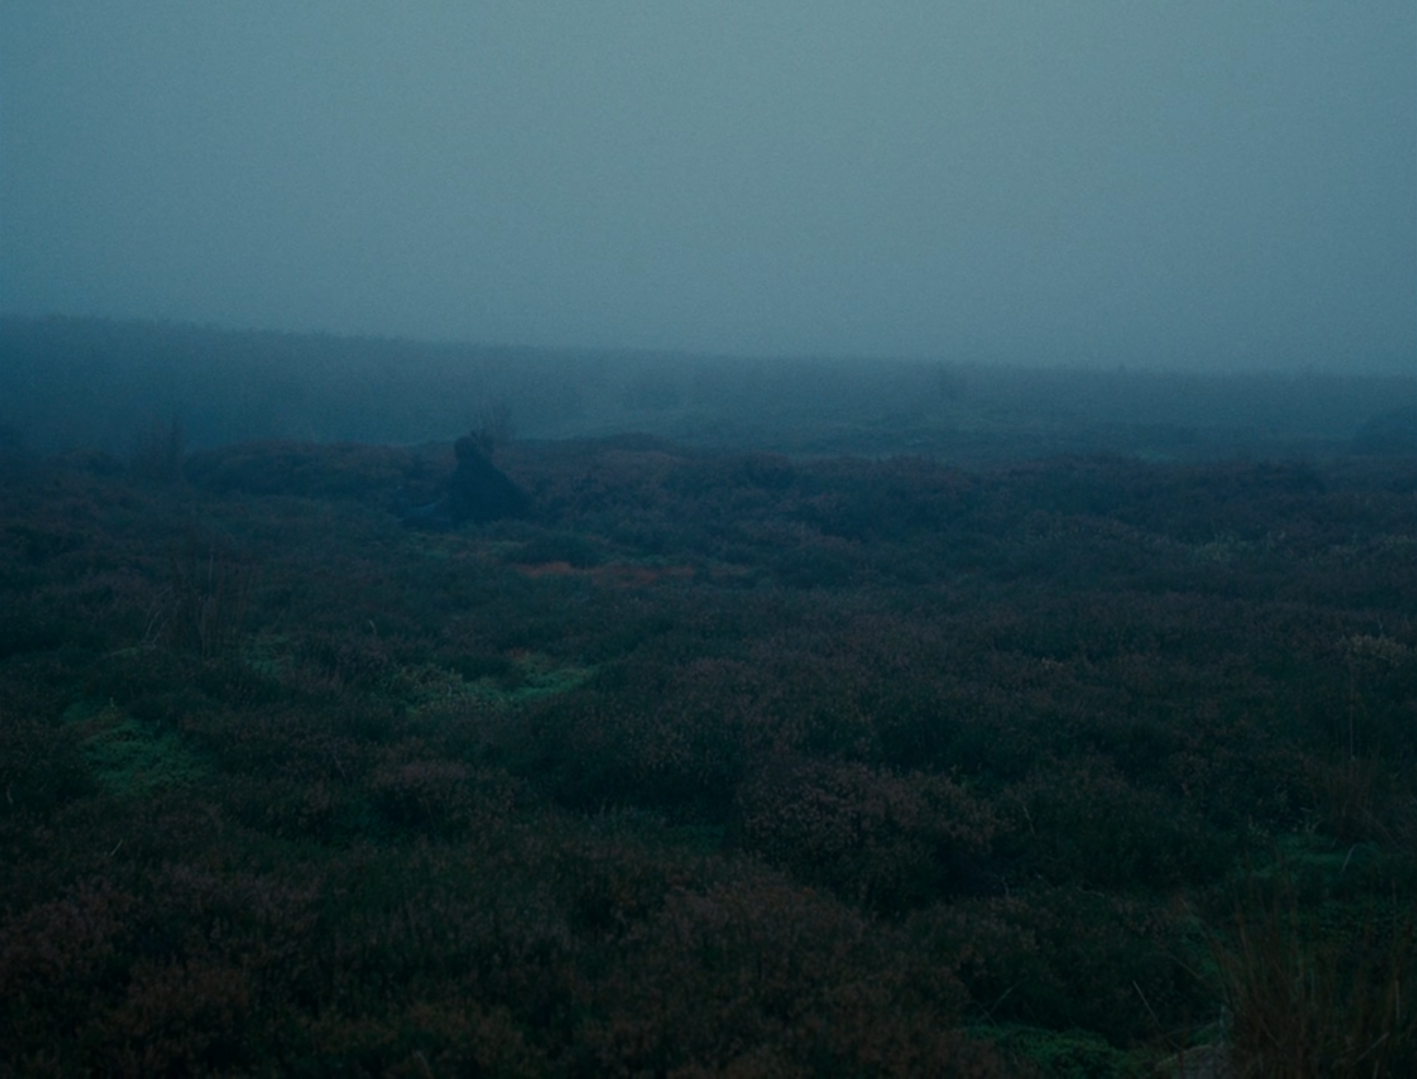 Wuthering Heights (2011): the uncanny connection with nature